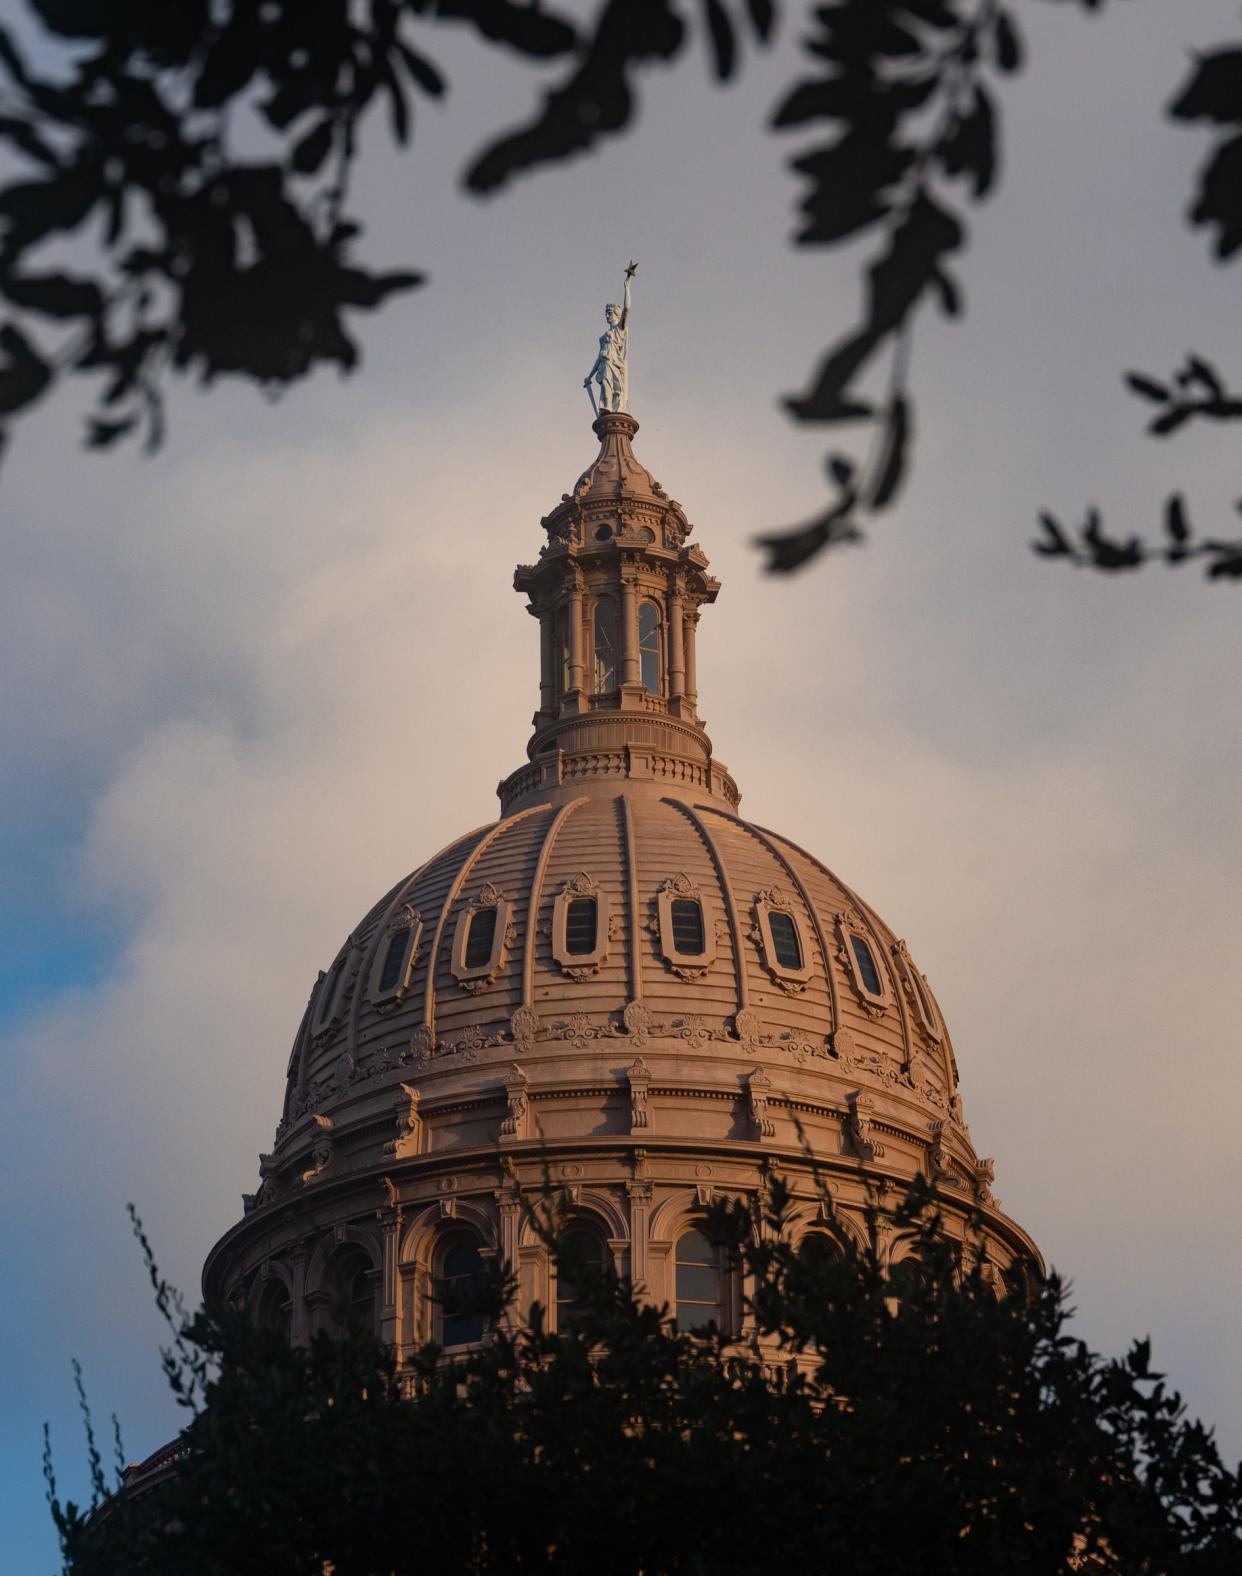 When Texas lawmakers reconvene at the Capitol on Jan. 14, they will focus on higher education issues ranging from diversity, equity and inclusion to affordability and accessibility.